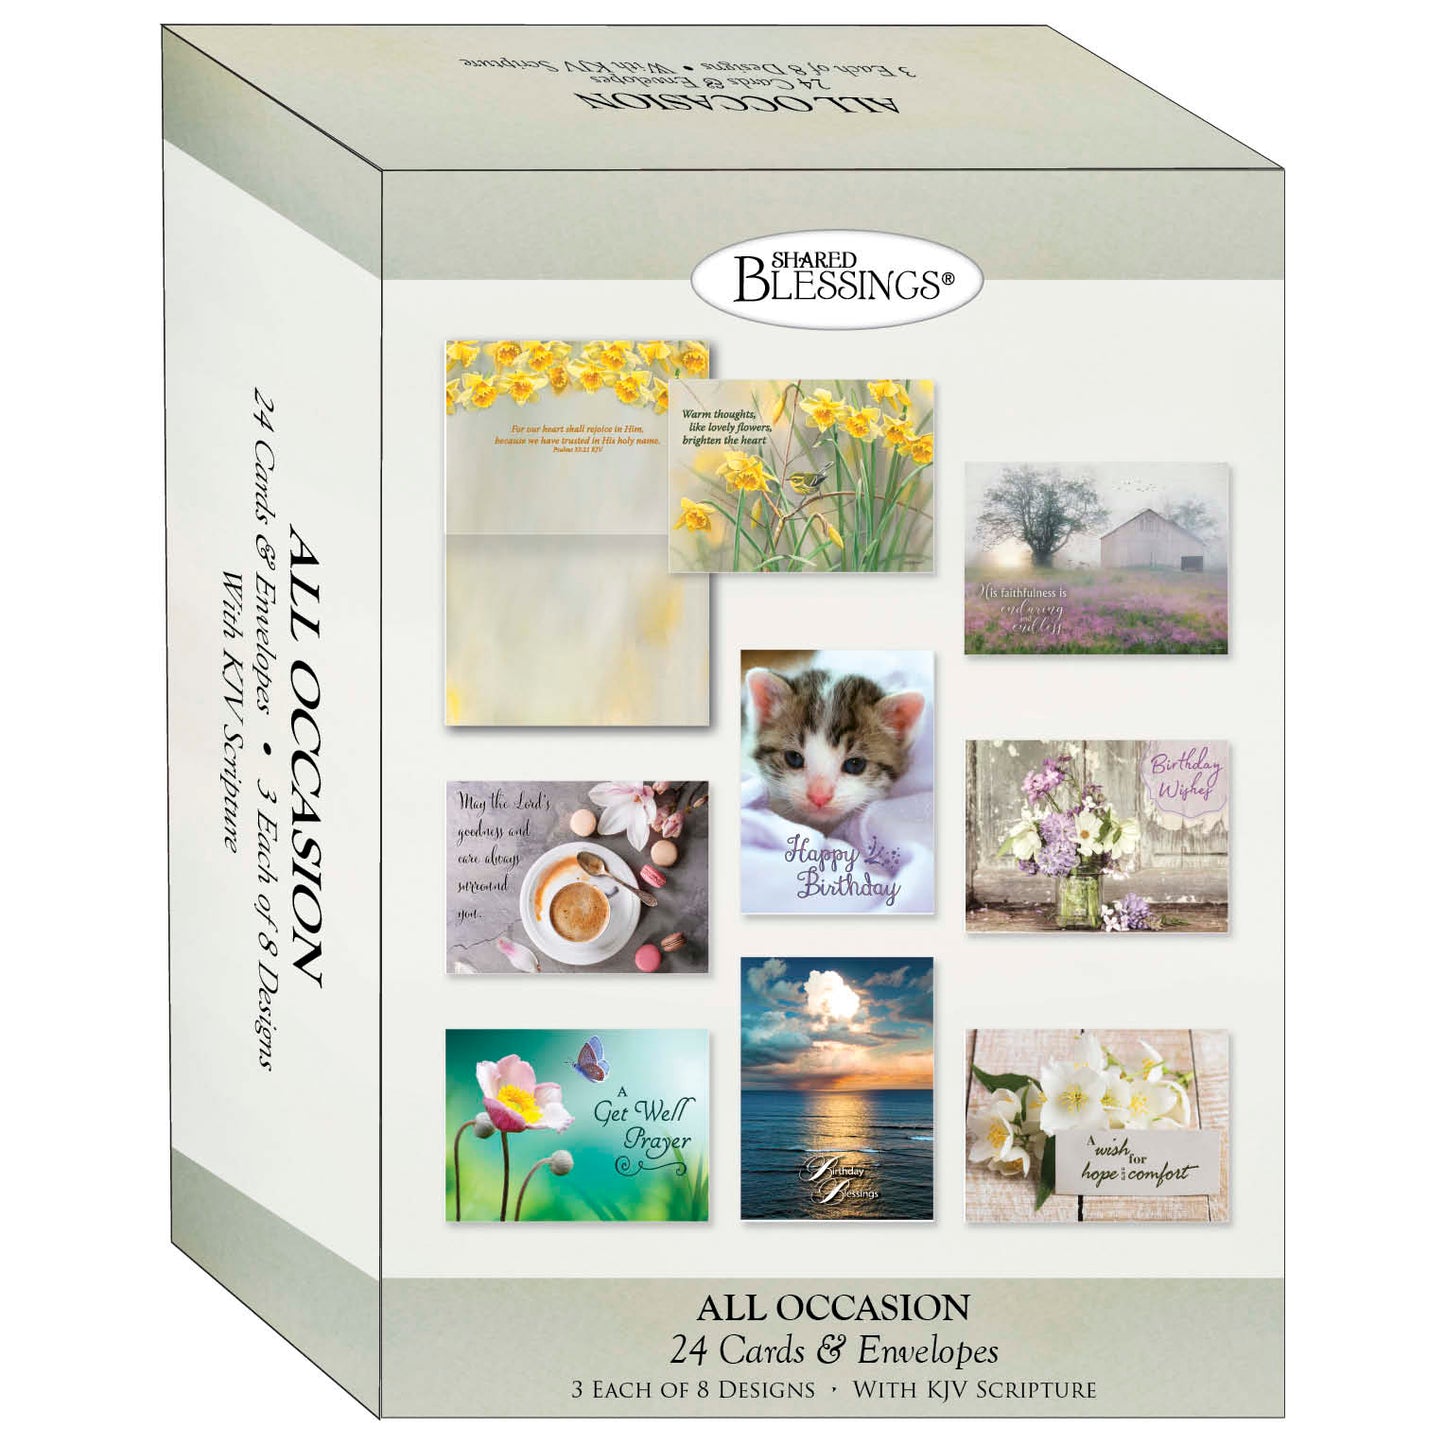 All Occasion Large Assortment - Variety Assortment Cards, Box of 24